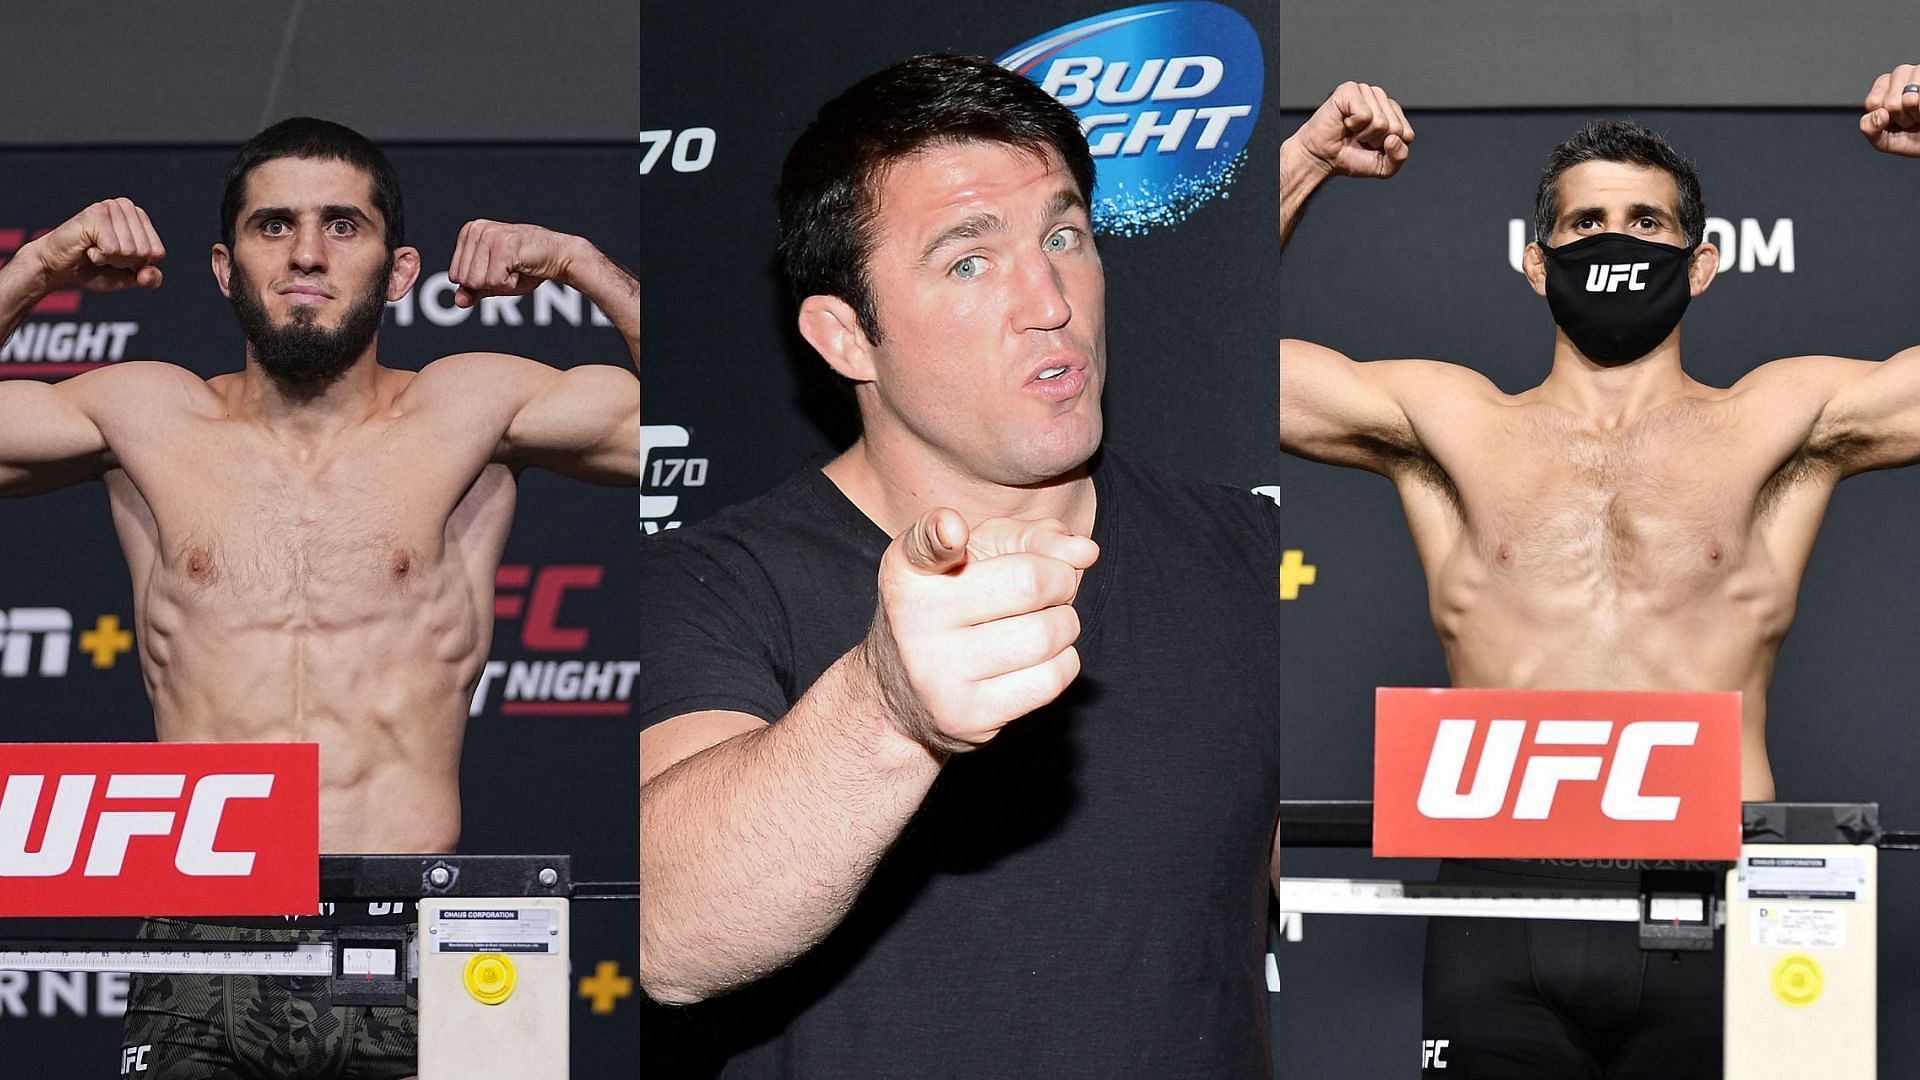 Islam Makhachev (Left), Chael Sonnen (Middle), and Beneil Dariush (Right)